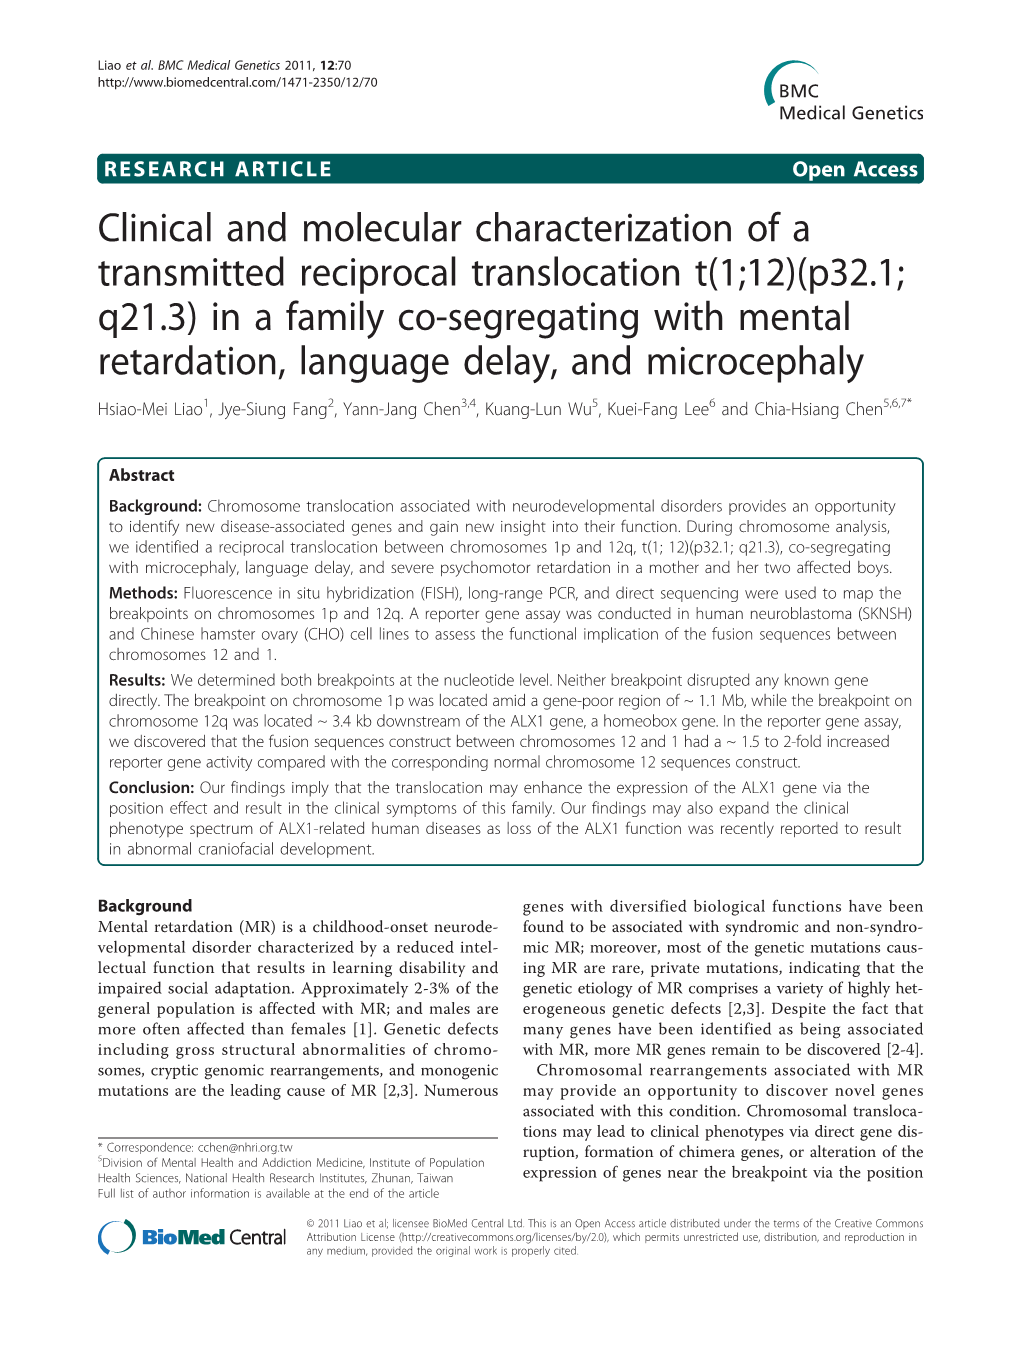 Clinical and Molecular Characterization Of